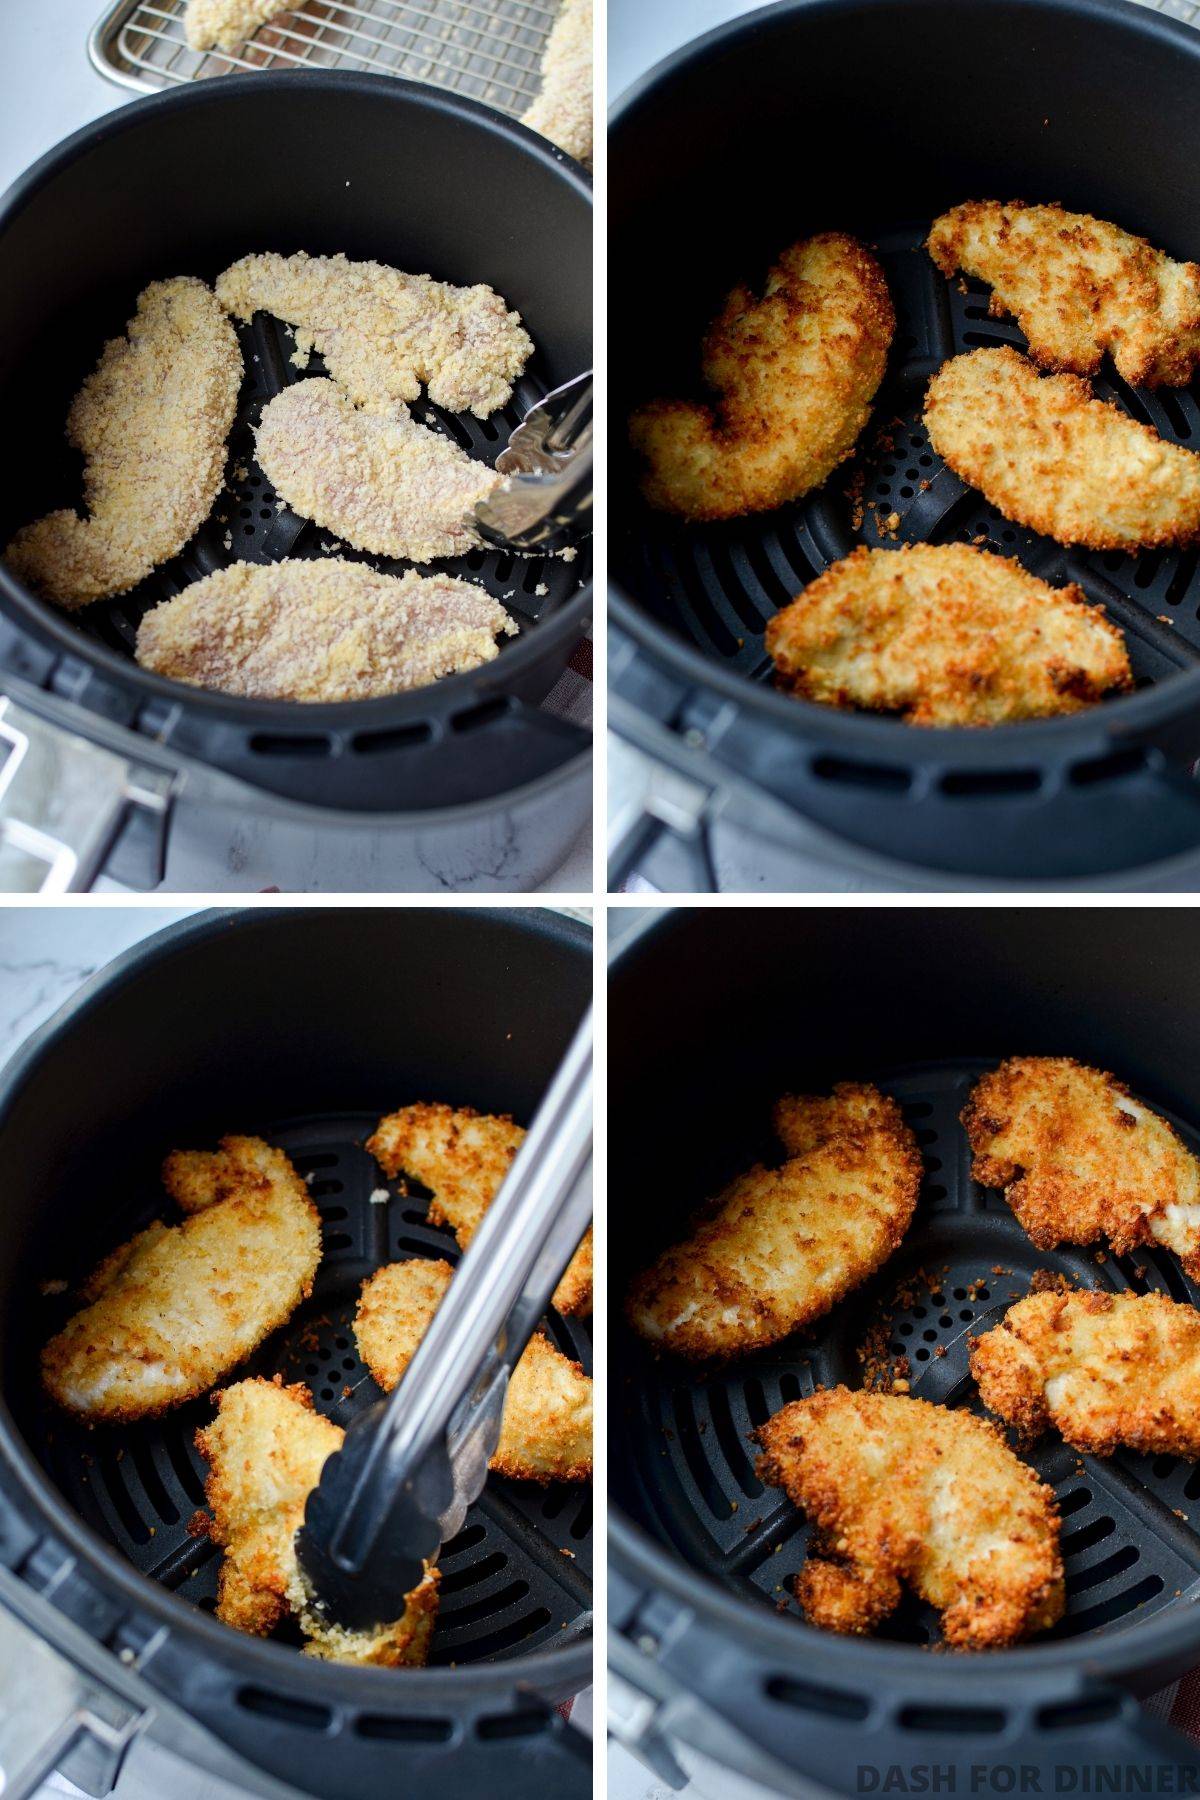 Adding breaded chicken tenders to an air fryer basket to cook.